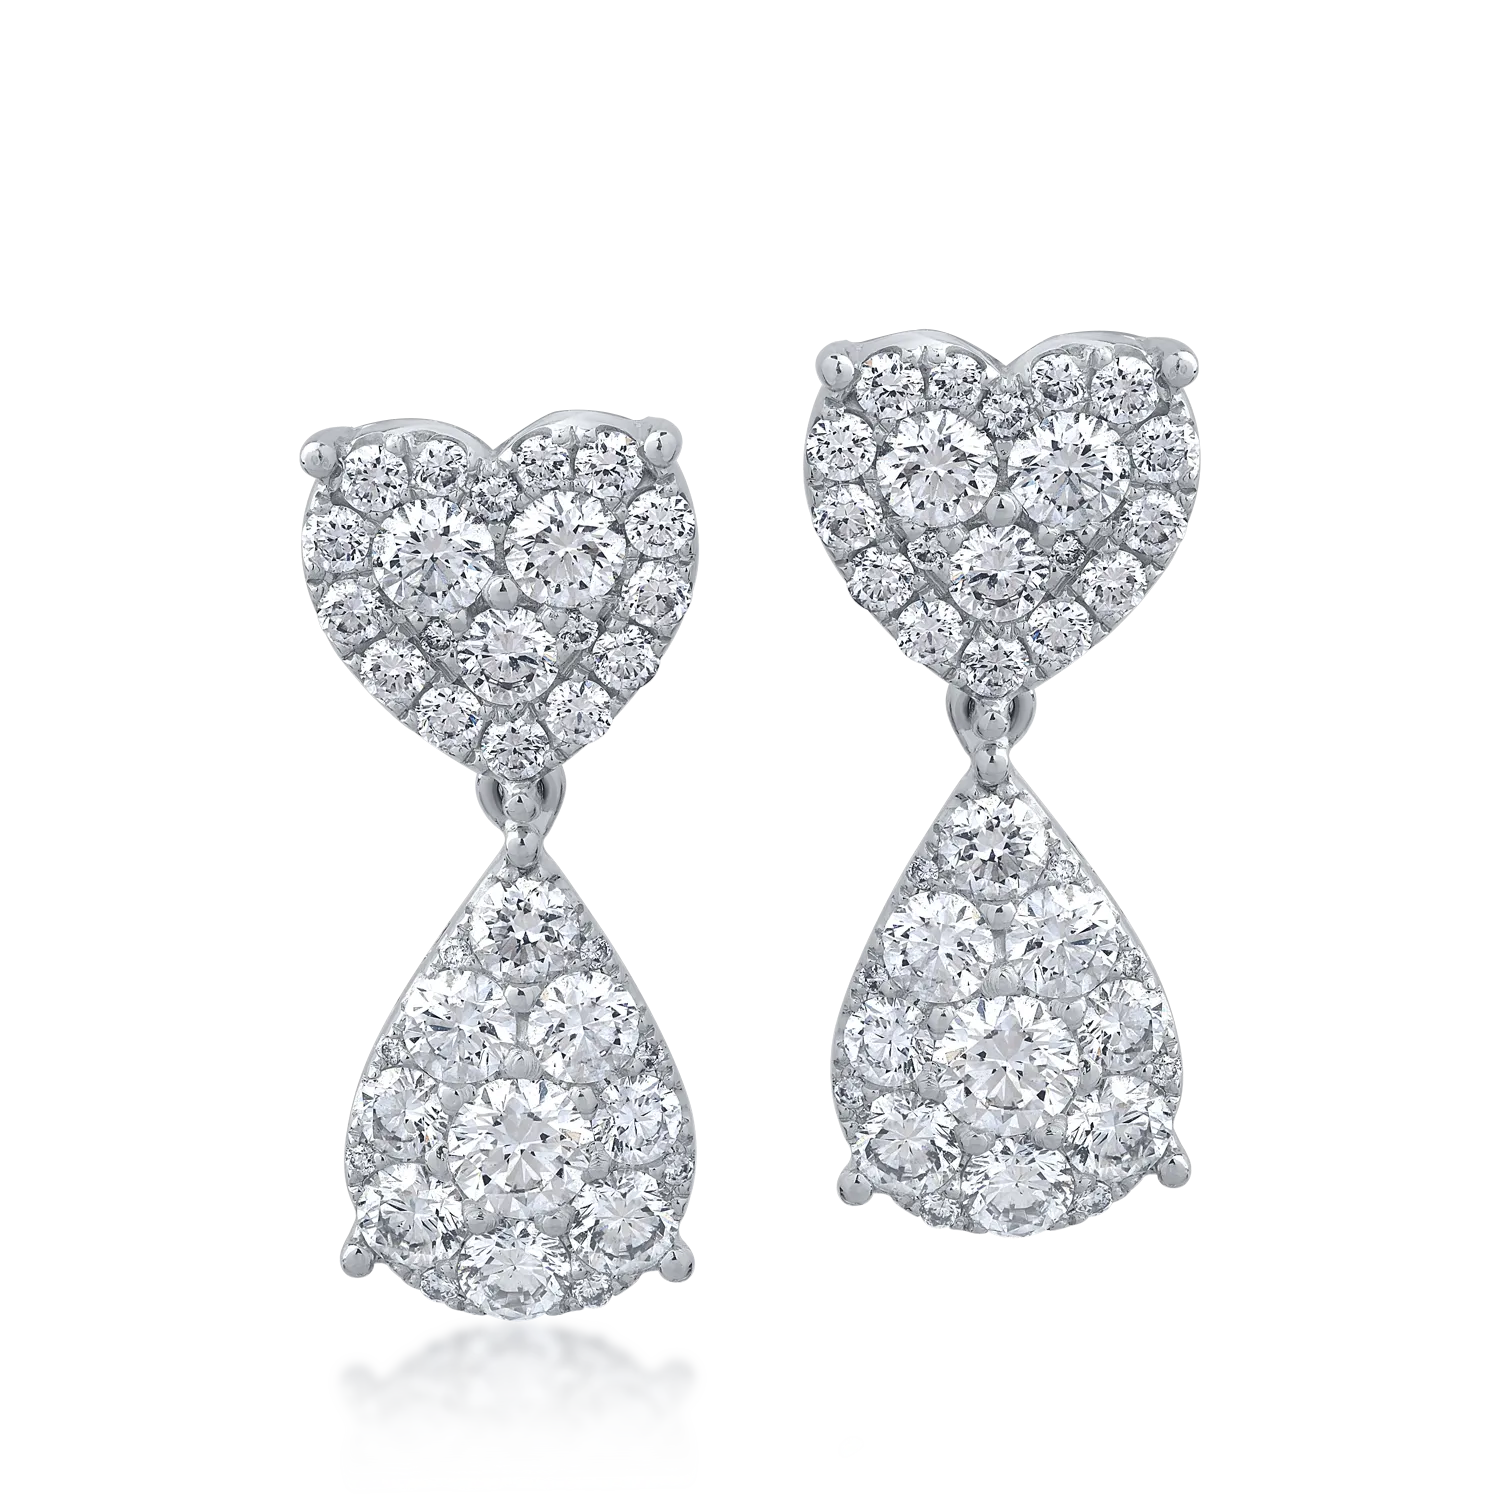 18K white gold earrings with 2.07ct diamonds